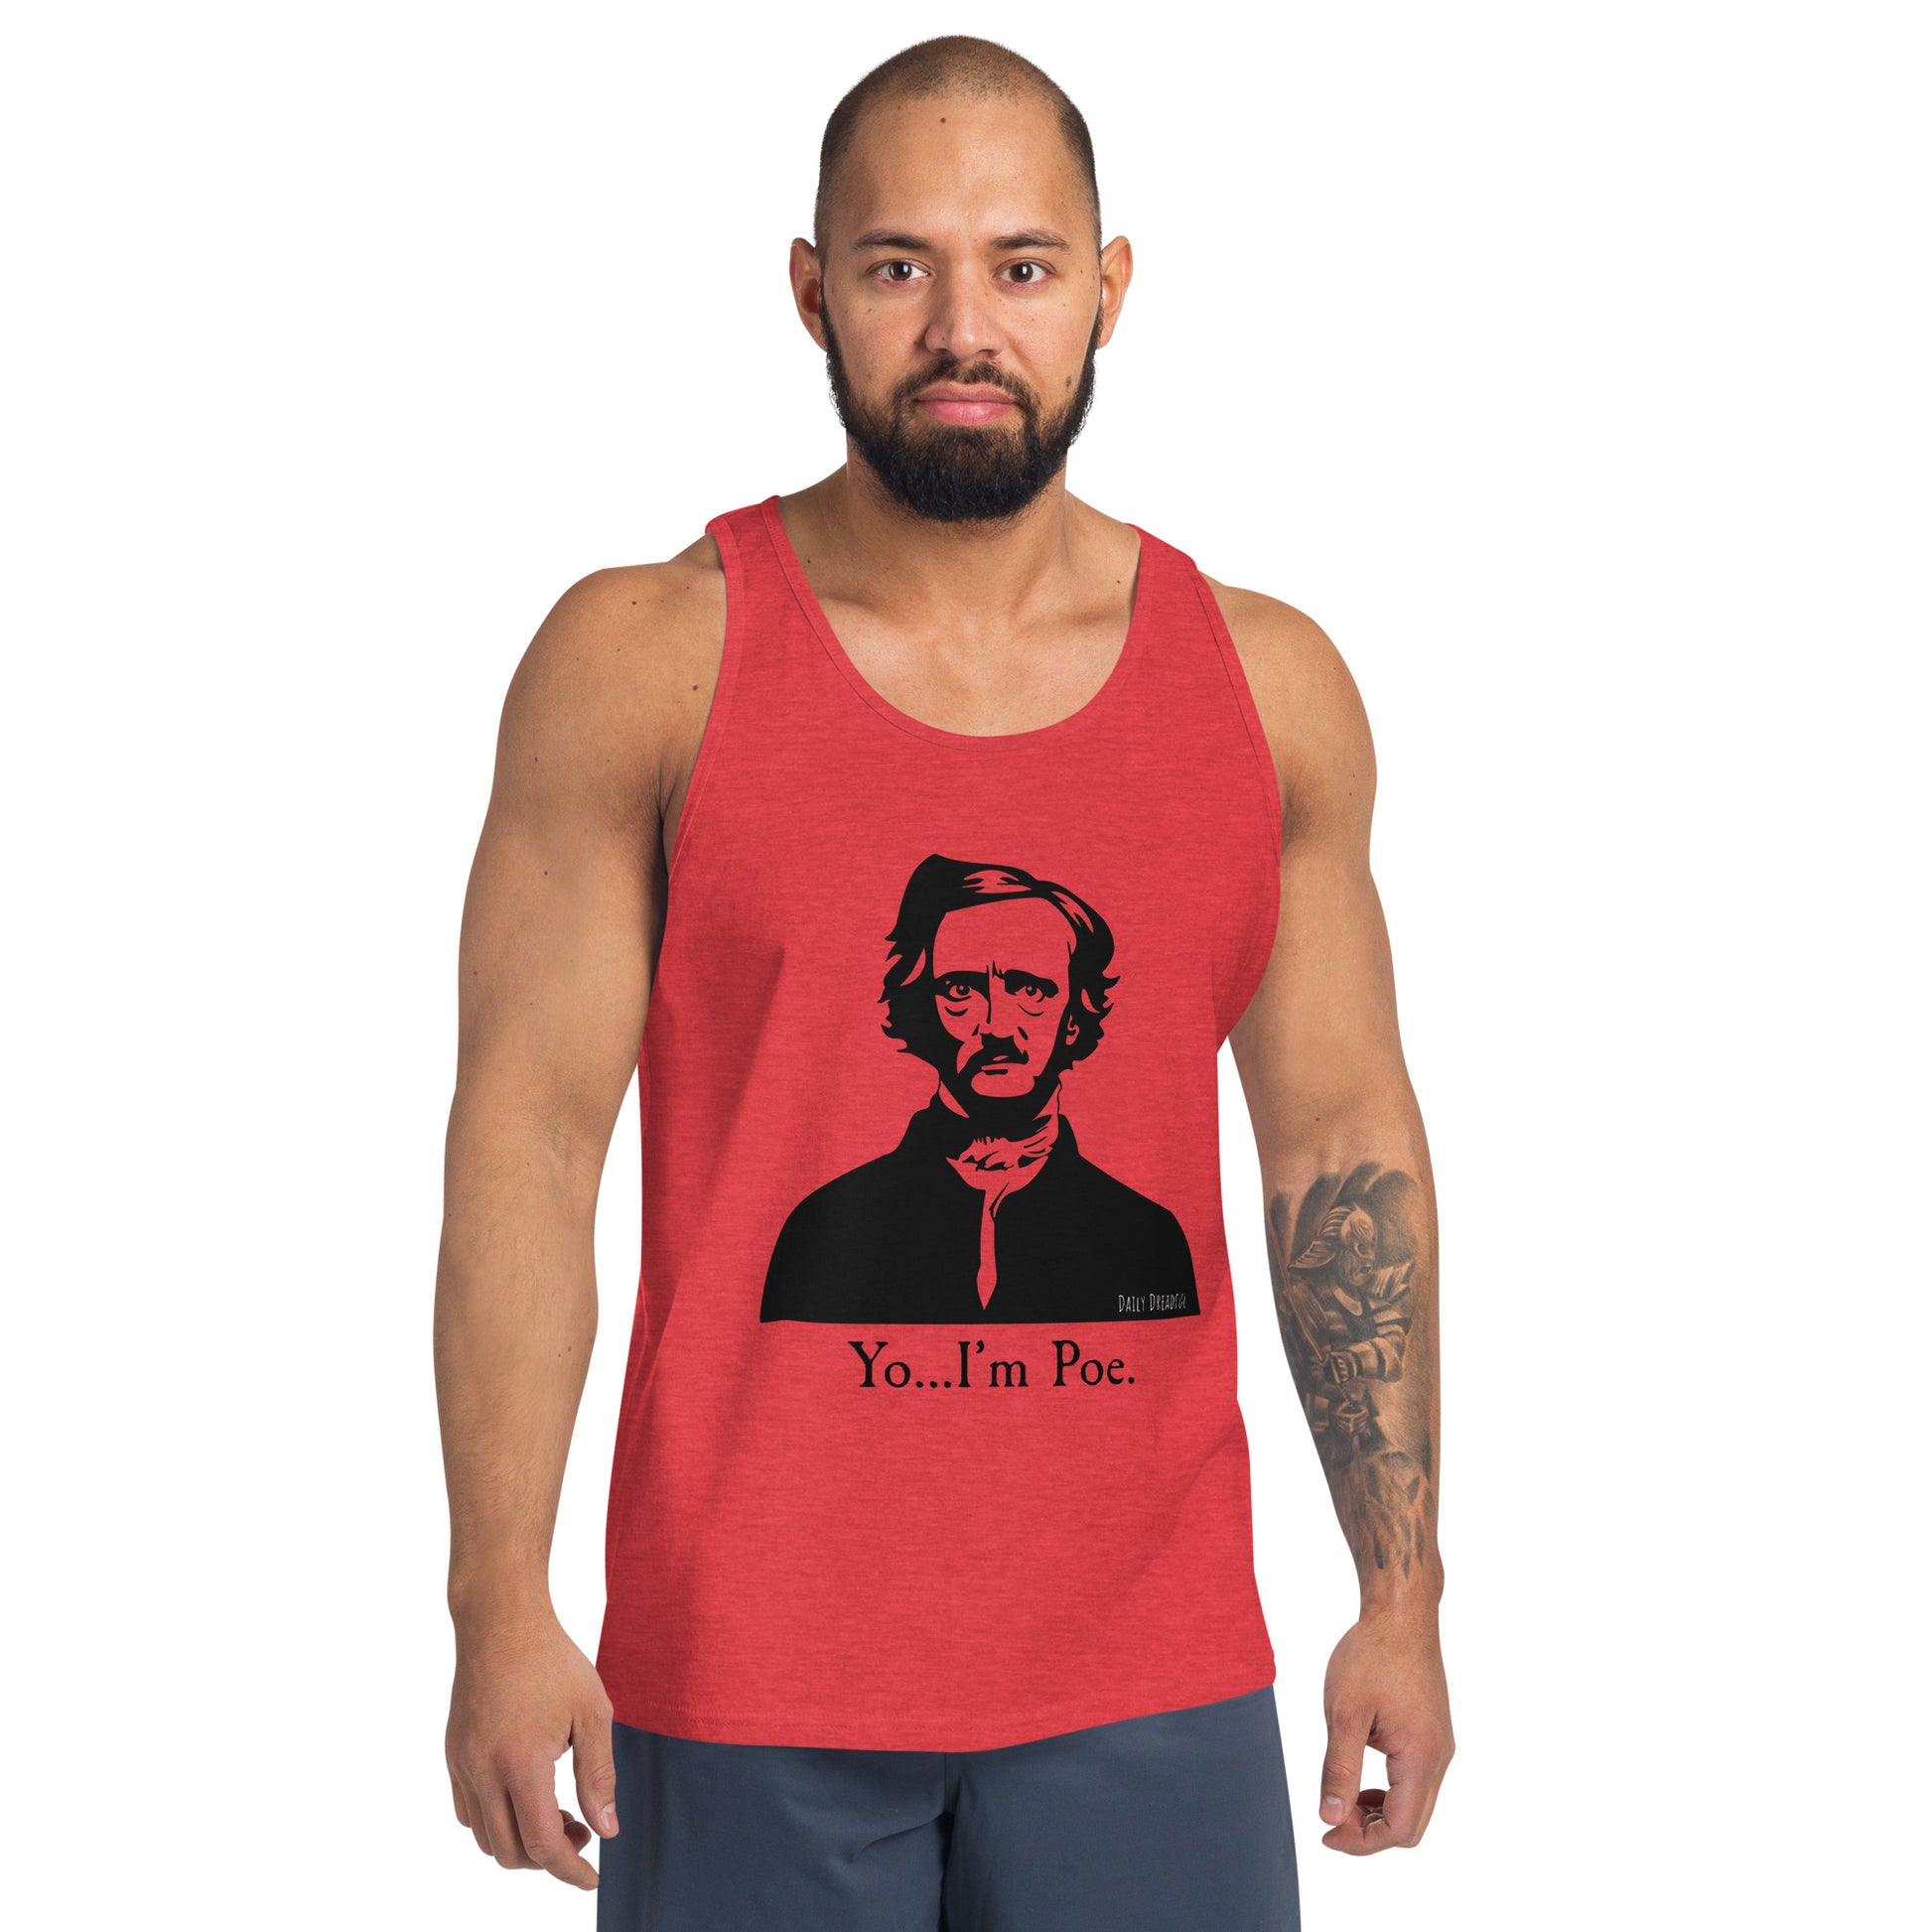 red triblend "Yo I'm Poe" Men's Tank Top from Daily Dreadful